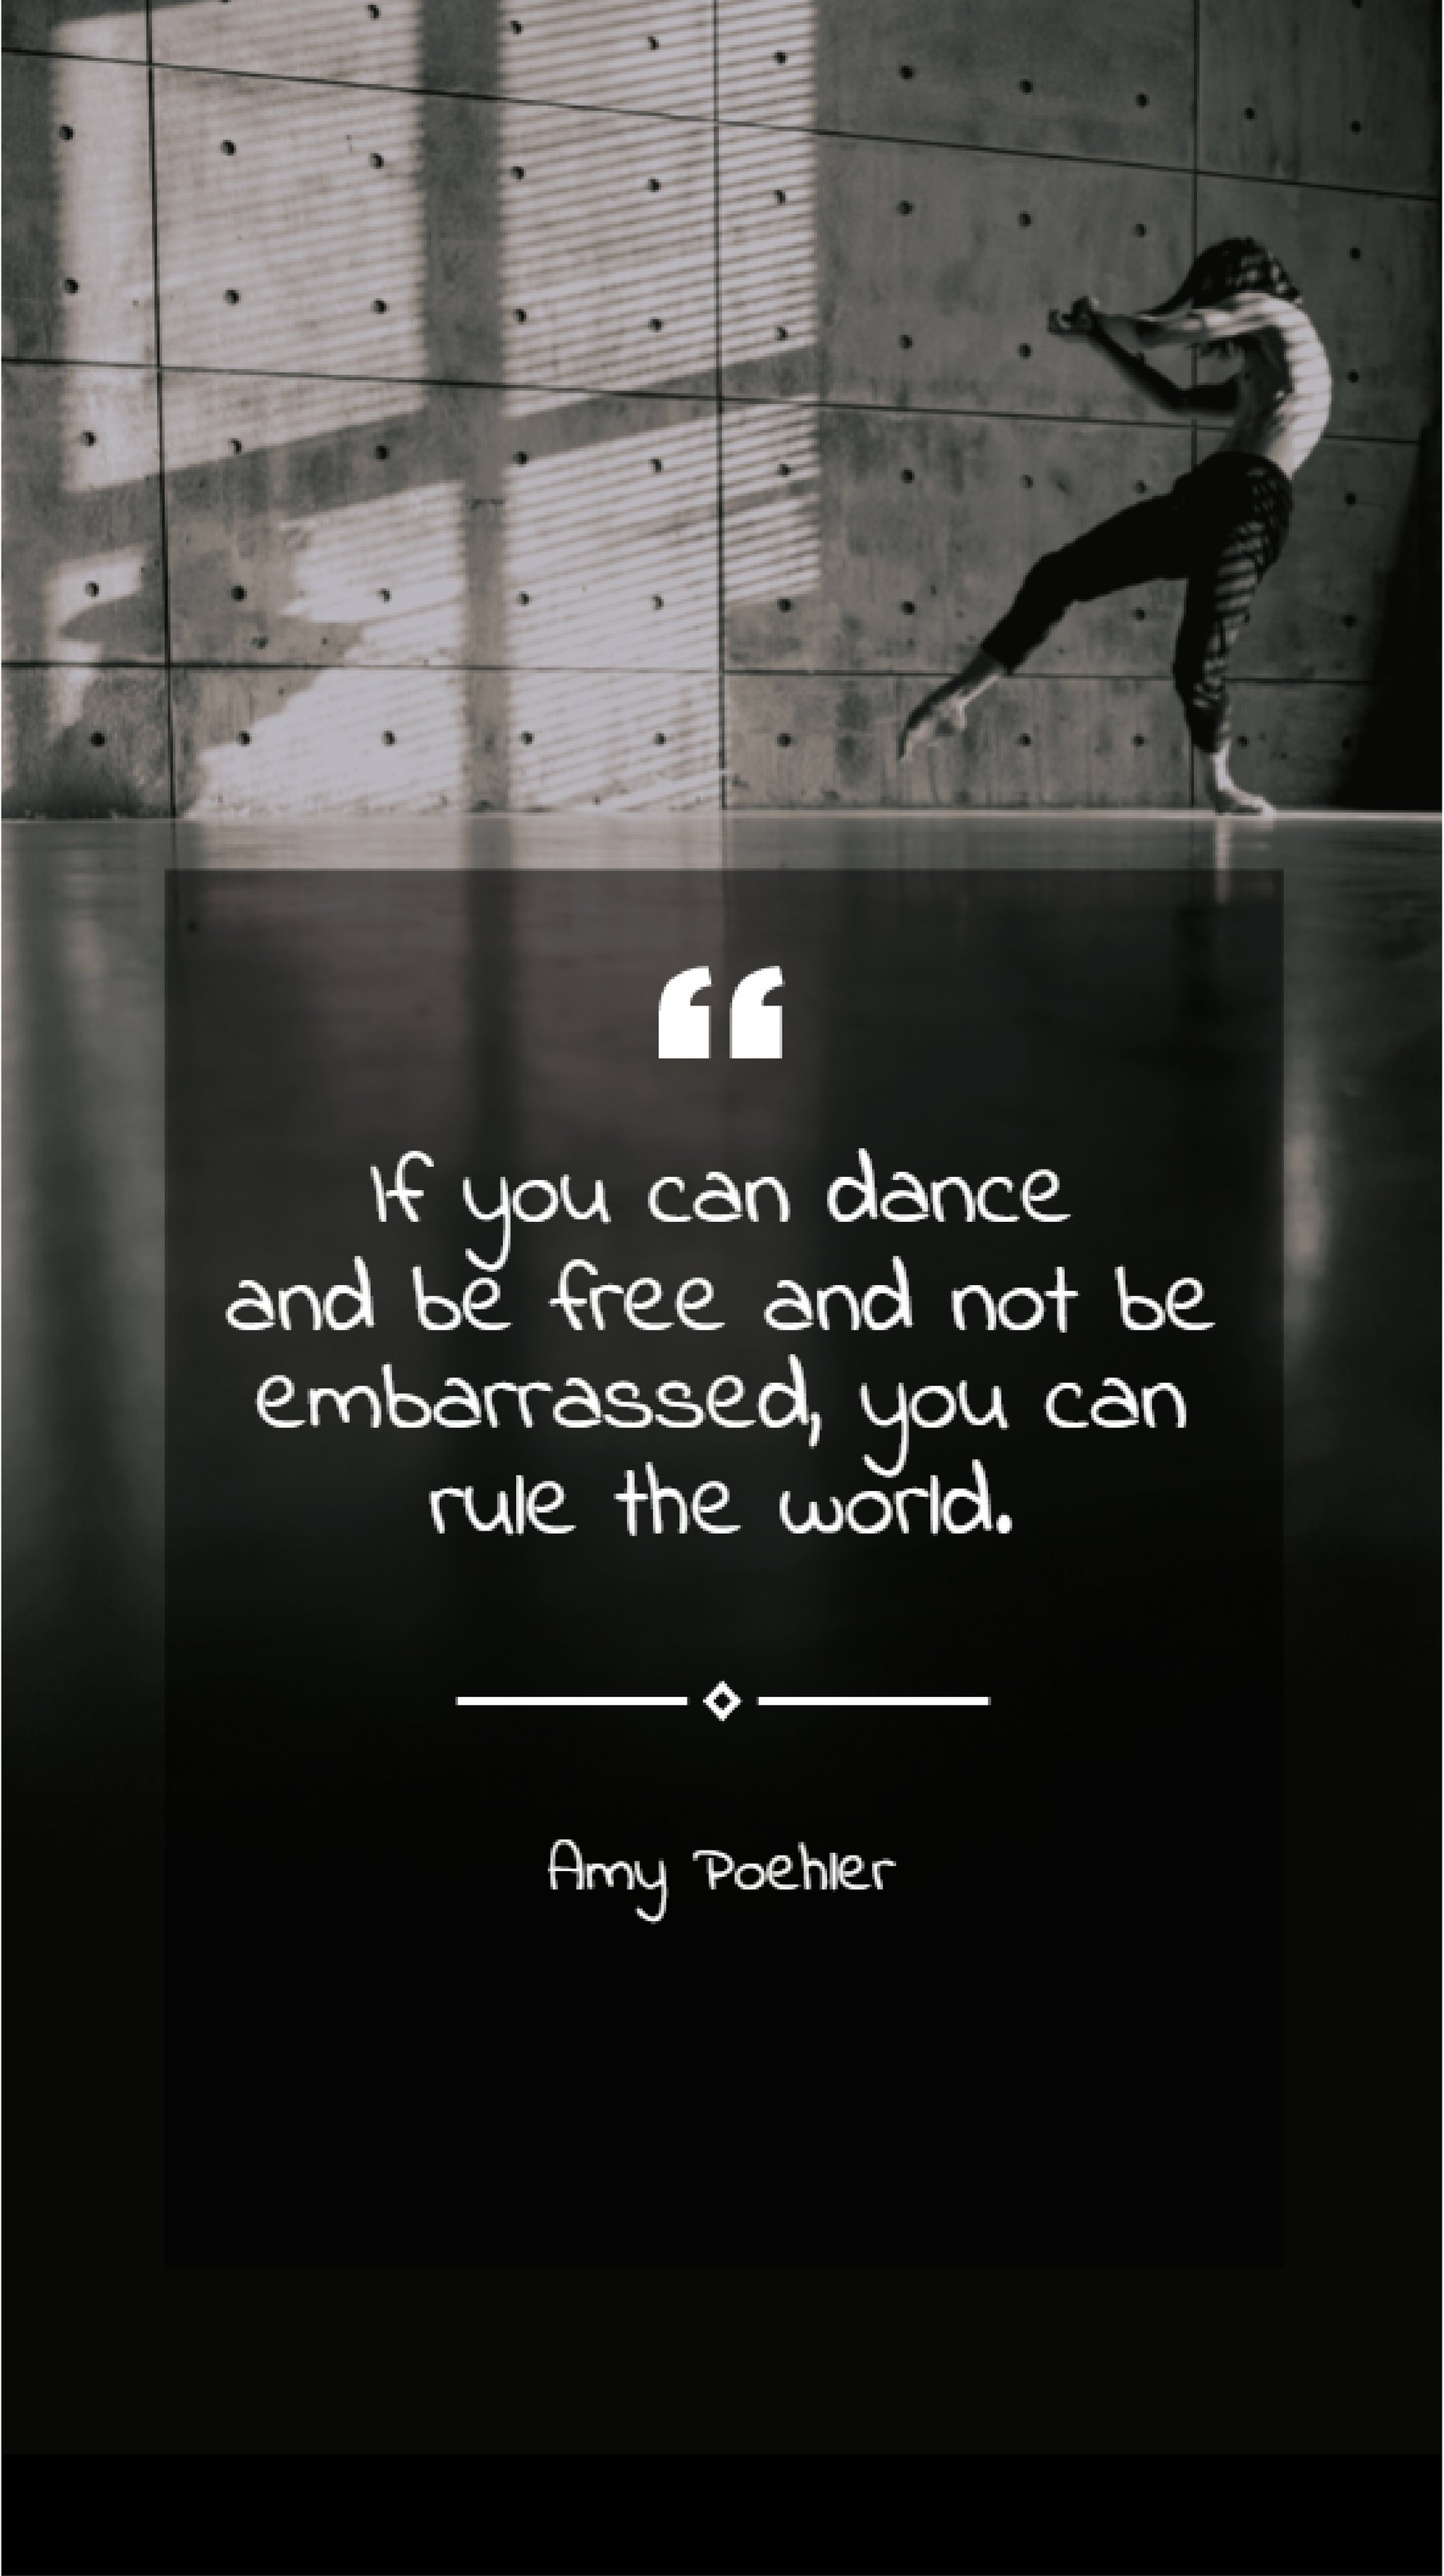 Amy Poehler - “If you can dance and be free and not be embarrassed, you can rule the world.”